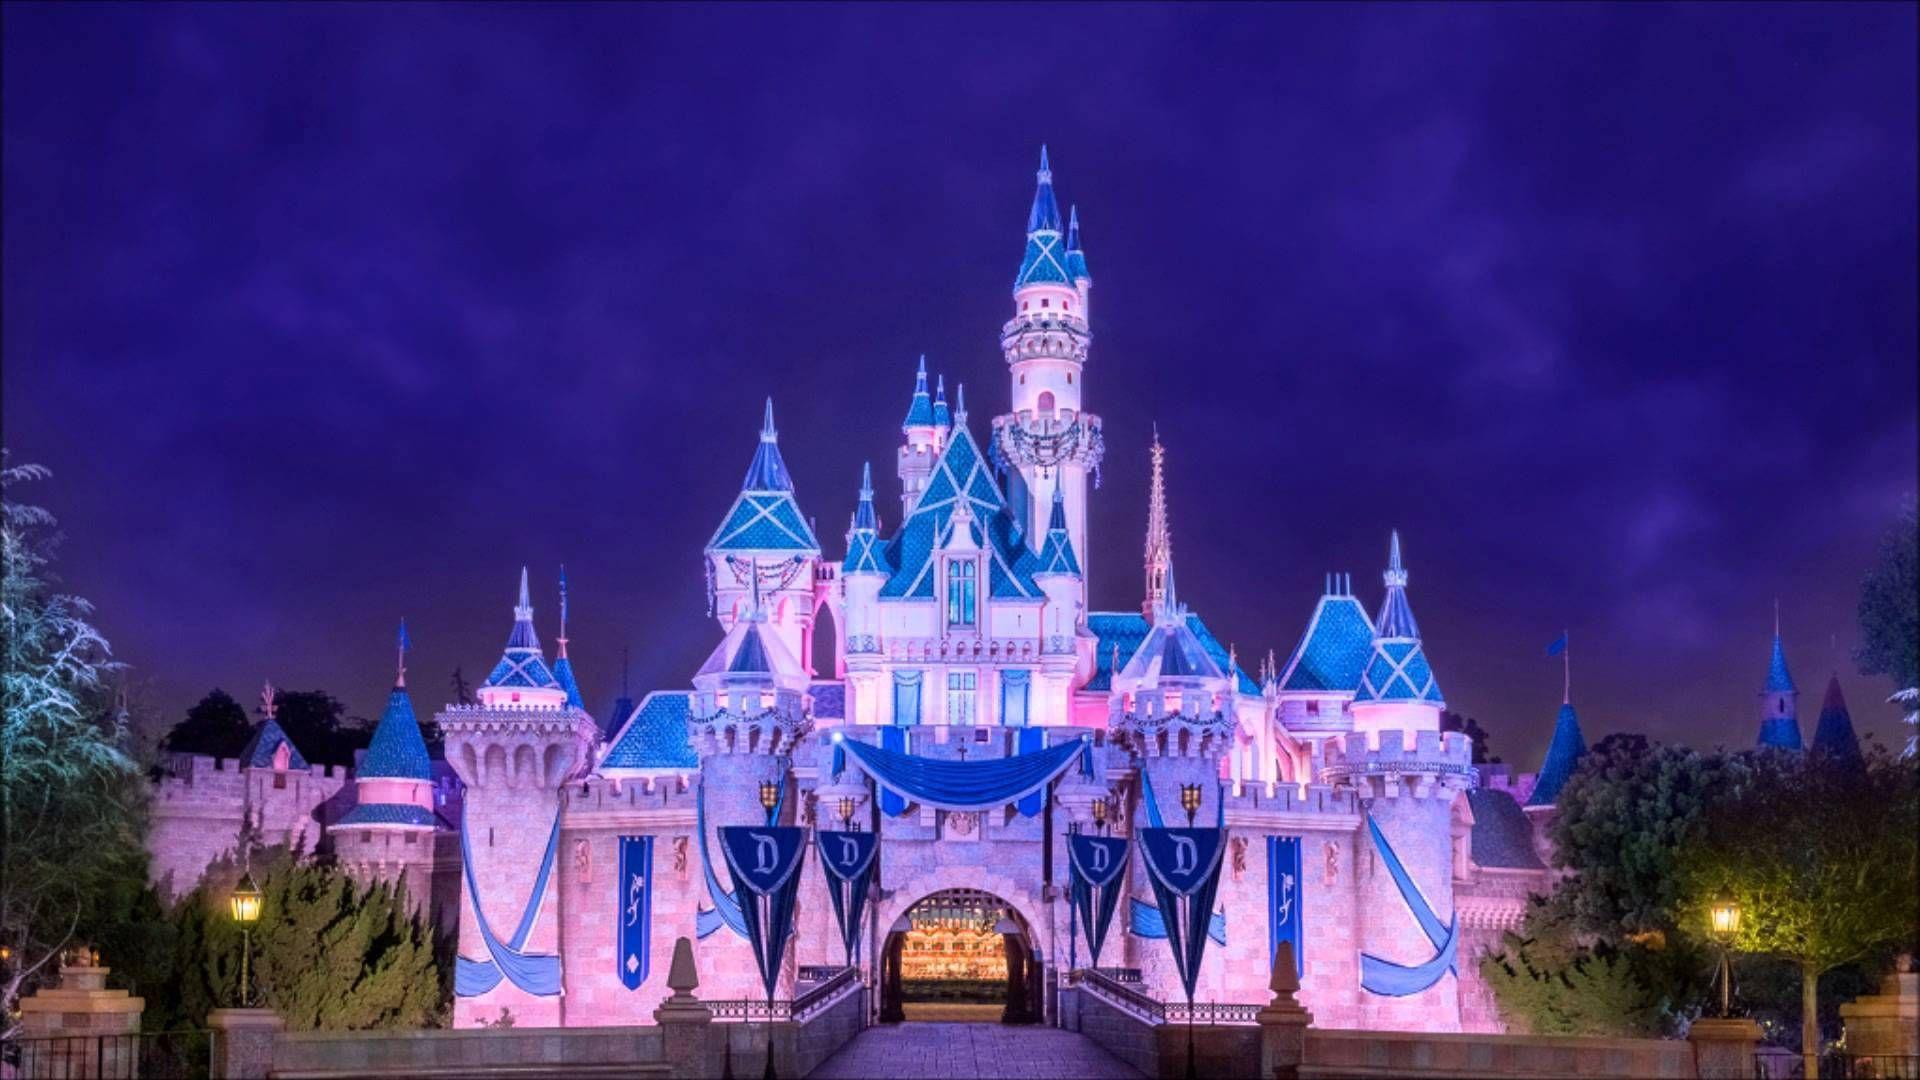 A picture of the castle at Disneyland - Disneyland